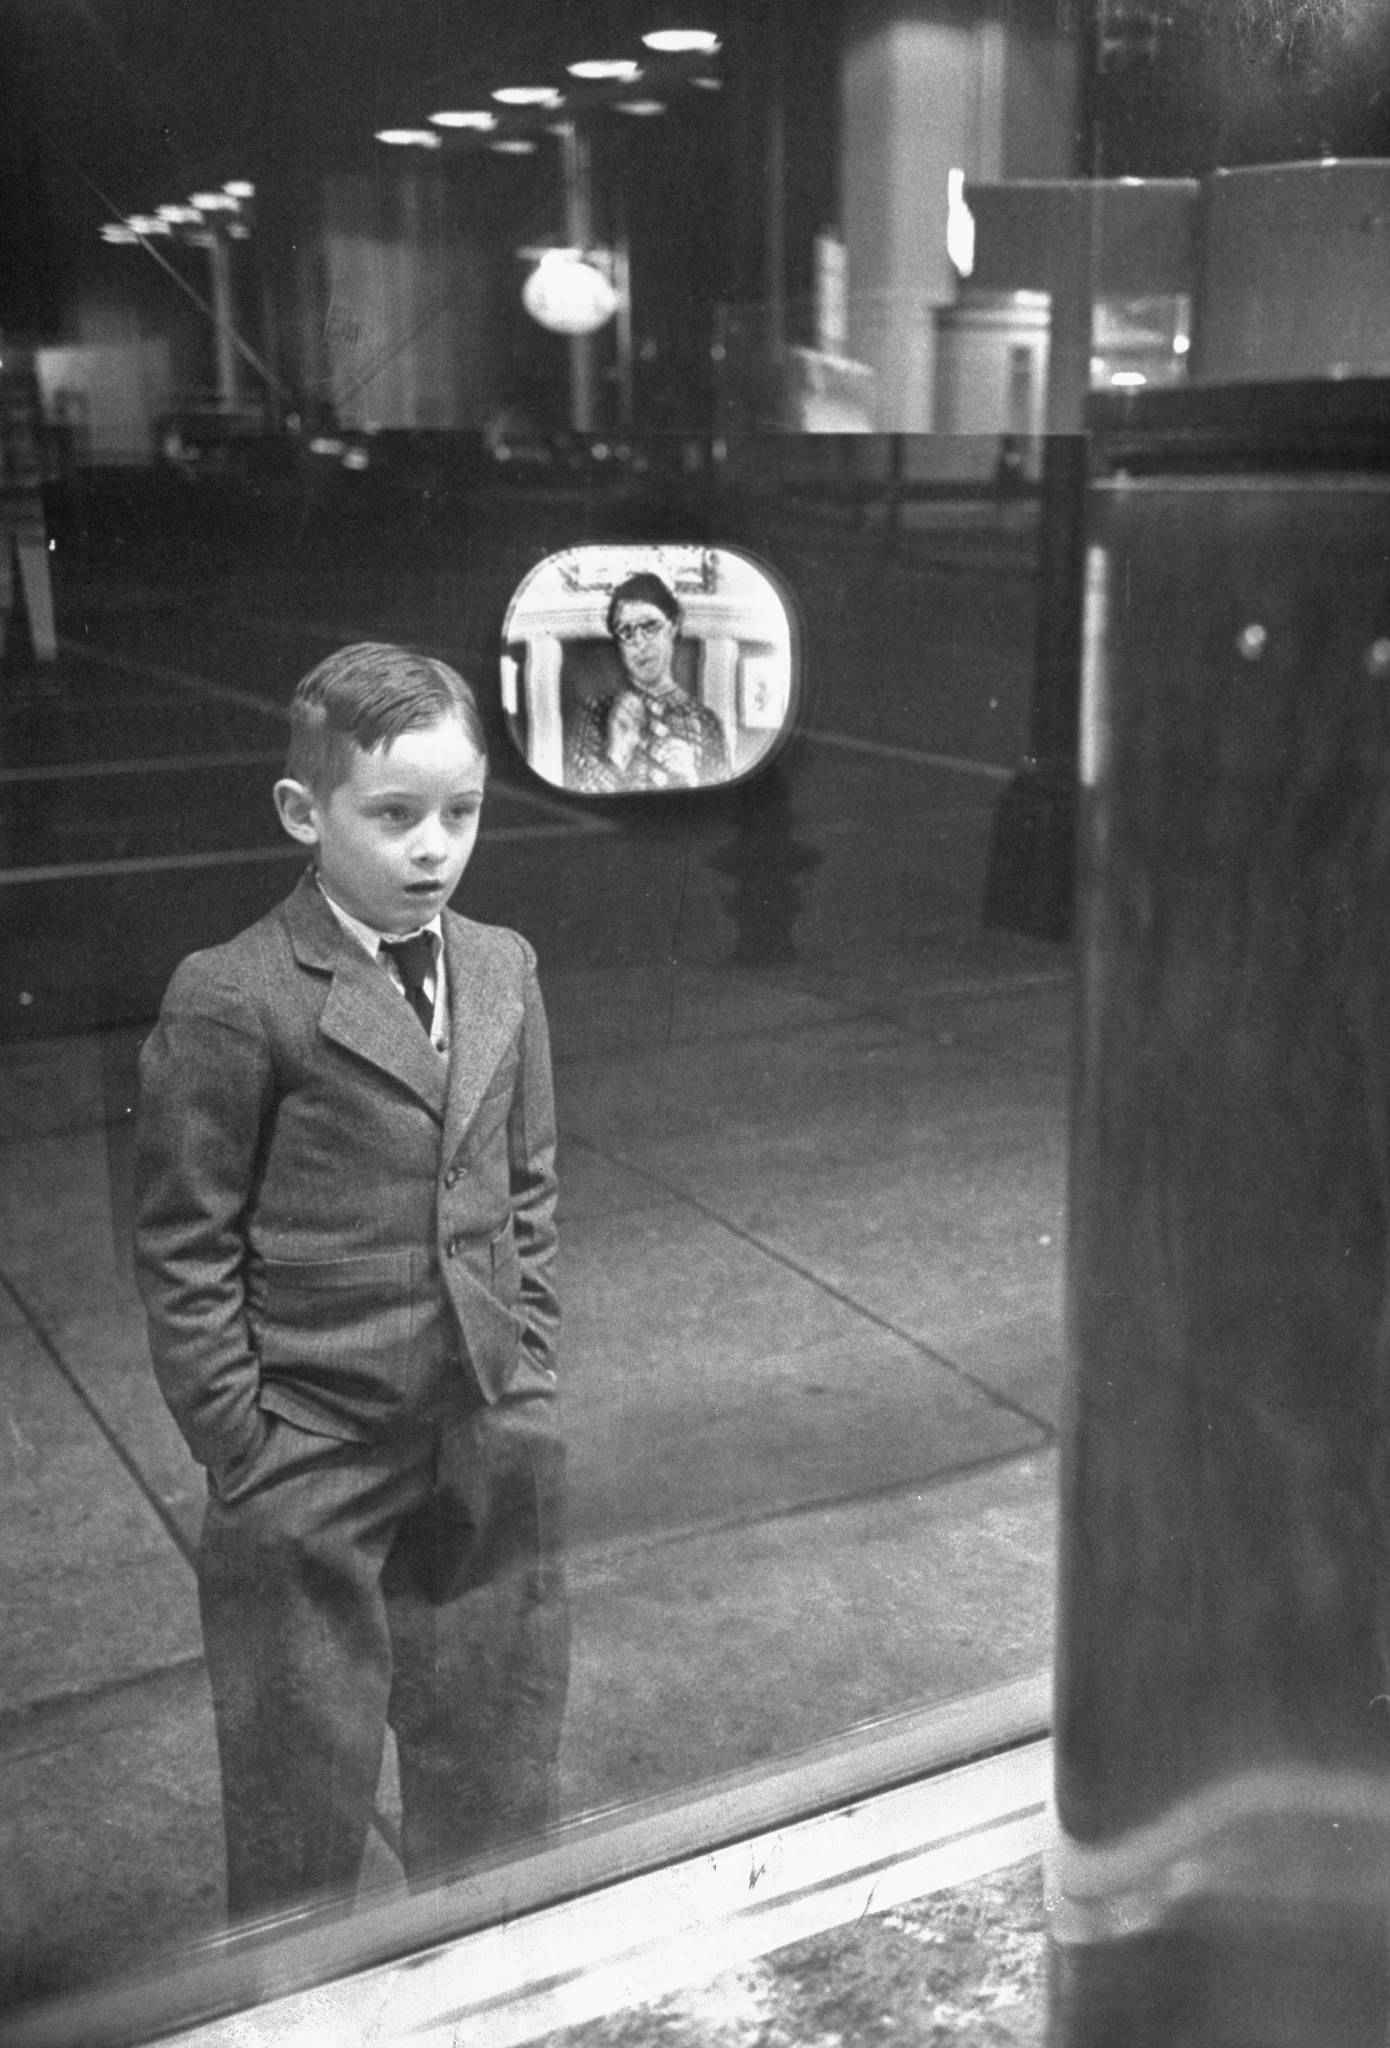 Boy watching TV for the first time in an appliance store window, 1948